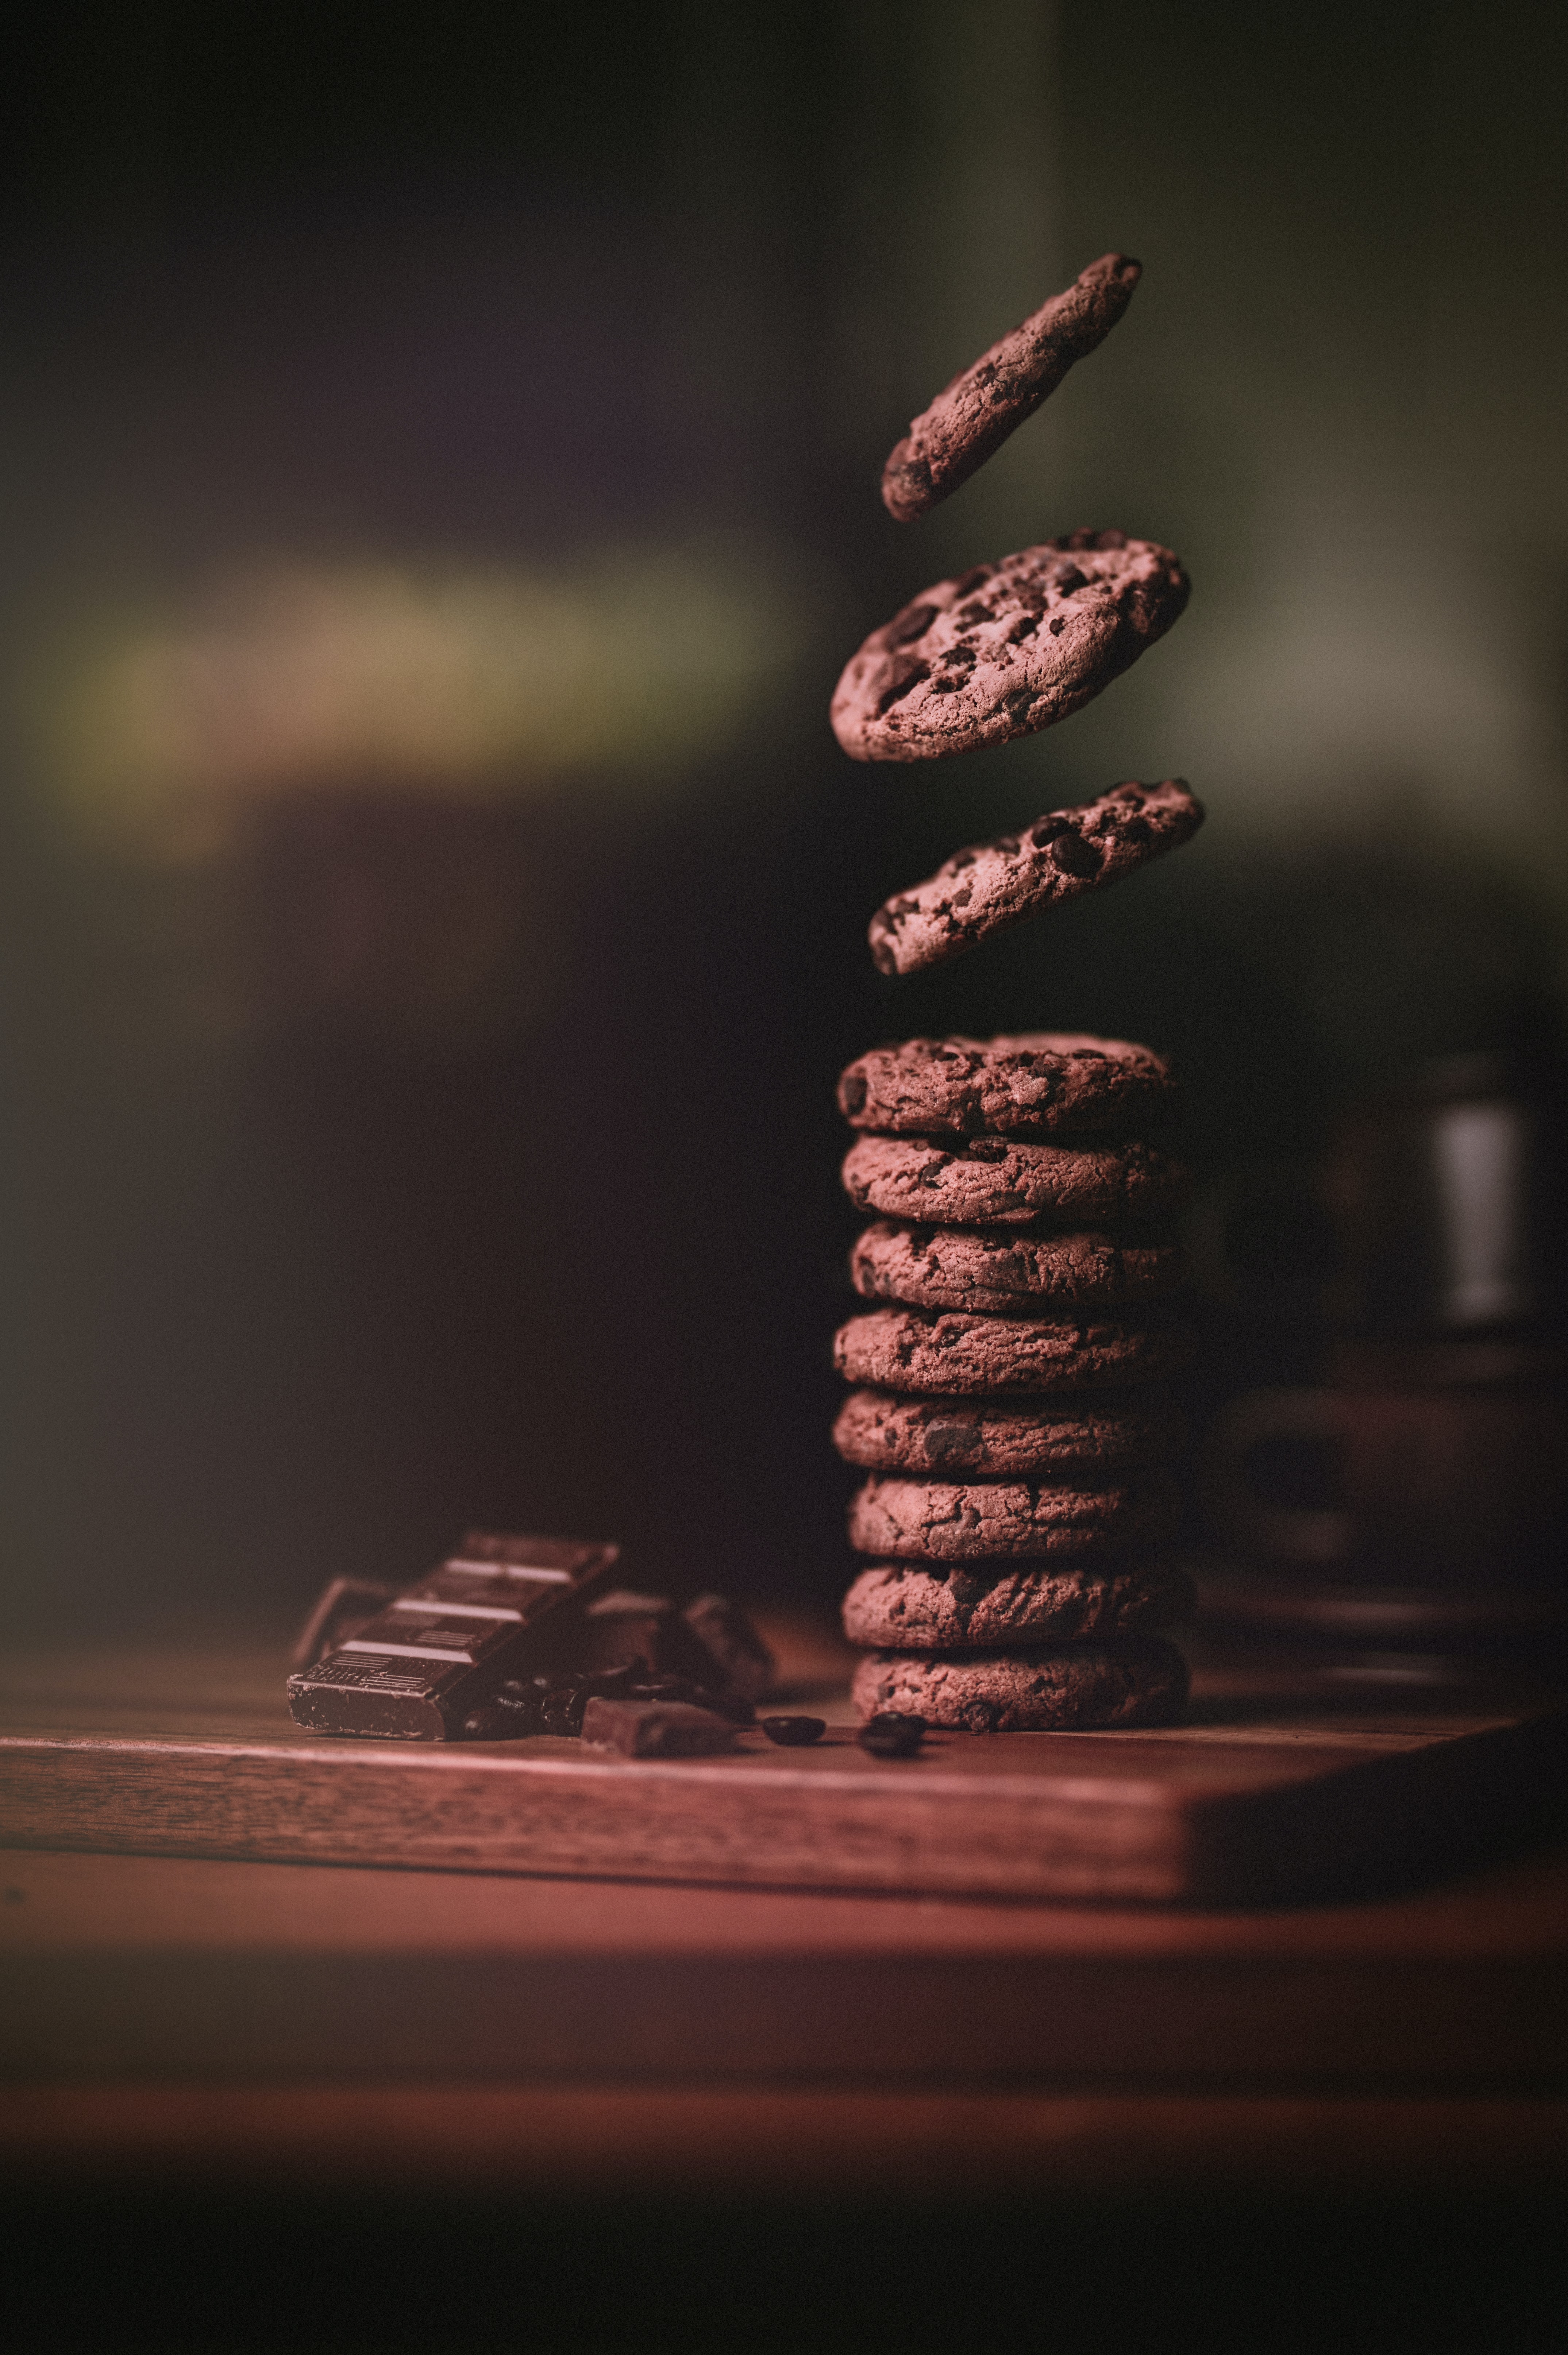 138563 download wallpaper chocolate, food, cookies, bakery products, baking, levitation screensavers and pictures for free